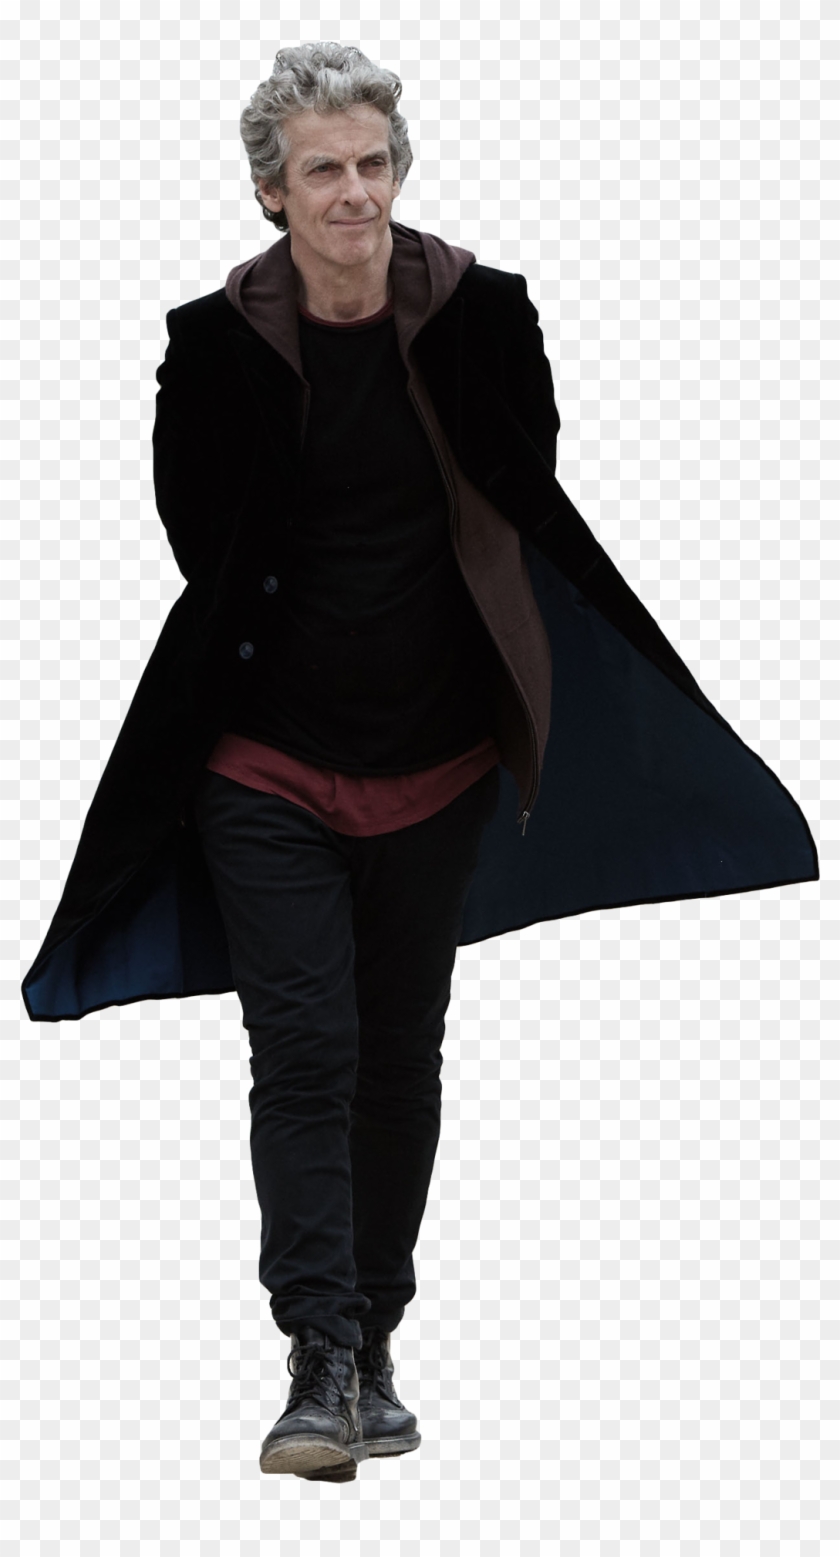 1080 X 1920 4 - Doctor Who Twelfth Doctor Png Clipart #531920